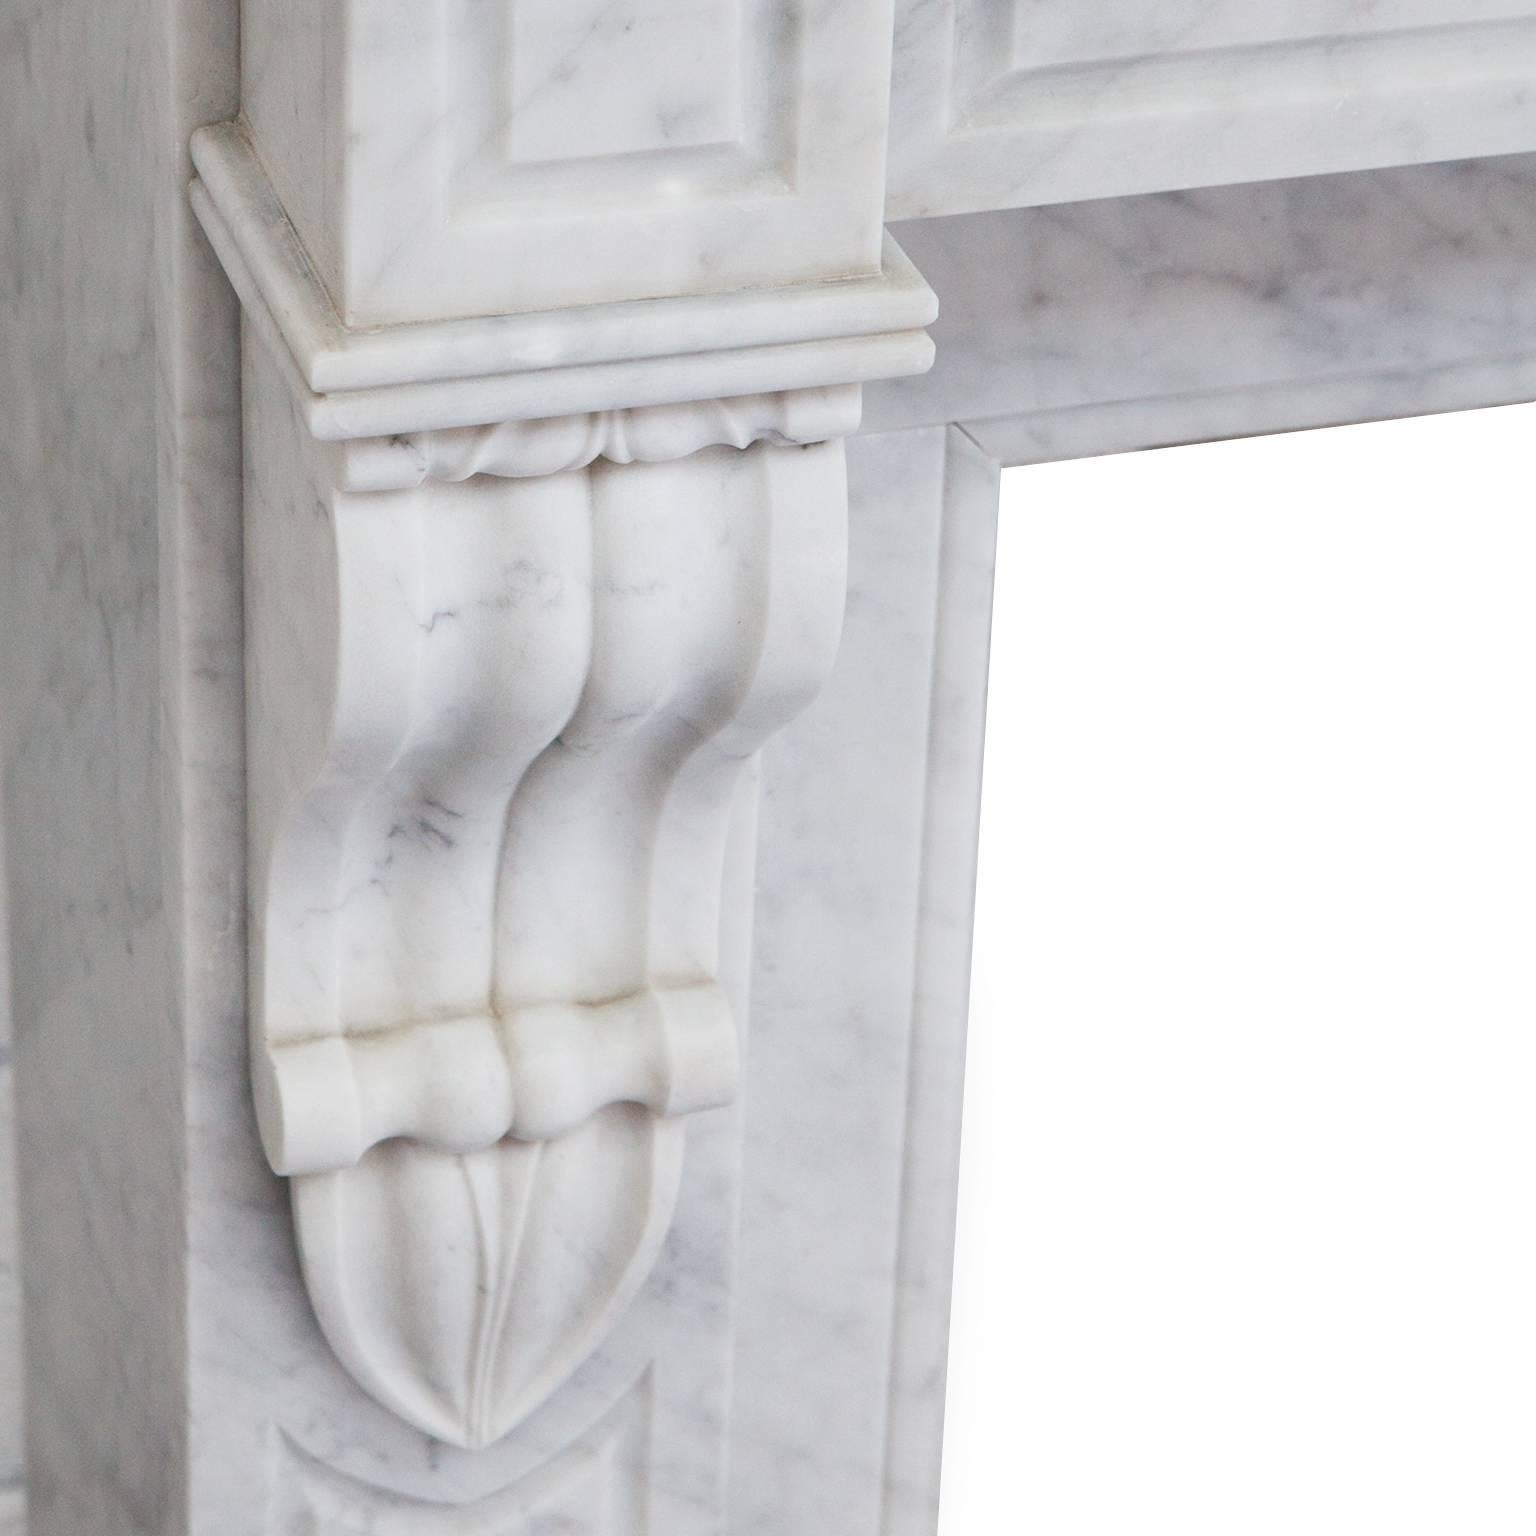 Unique Rare 19th century antique French Louis Phillipe Fireplace Mantel. Hand-carved in desirable Italian Carrara marble. Recessed panelled jambs and frieze with carved centre circle and elegantly carved corbels.

Full measurements:
Shelf width